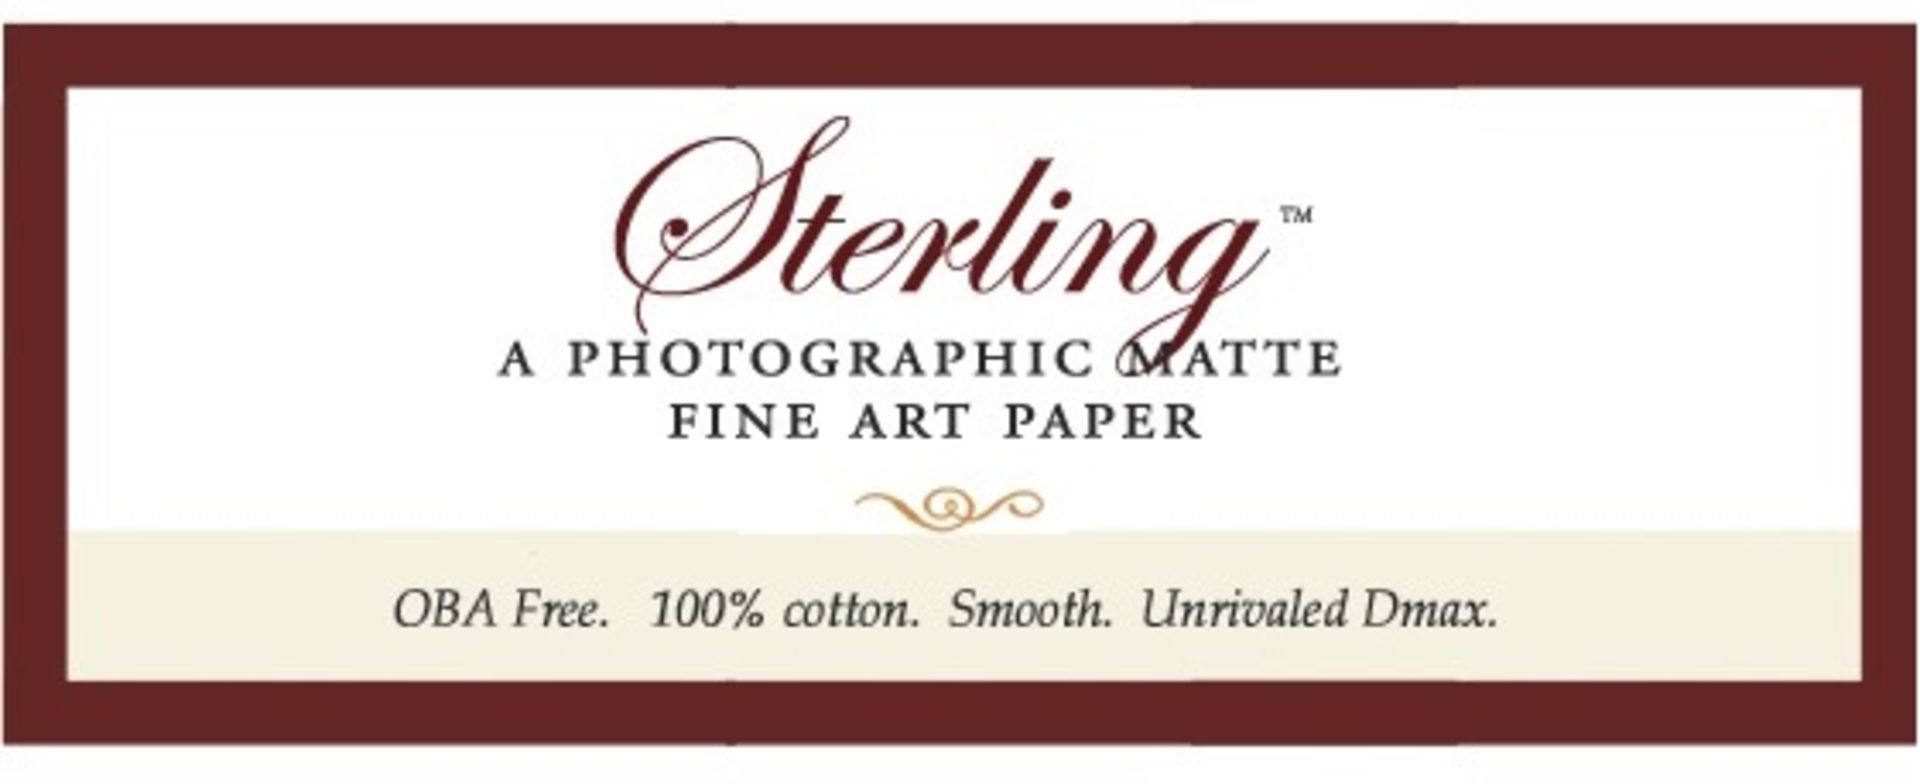 1 x Roll of Breathing Colour STERLING Photographic Matte Fine Art Paper - Size 24" x 50' - 250gsm - - Image 3 of 5